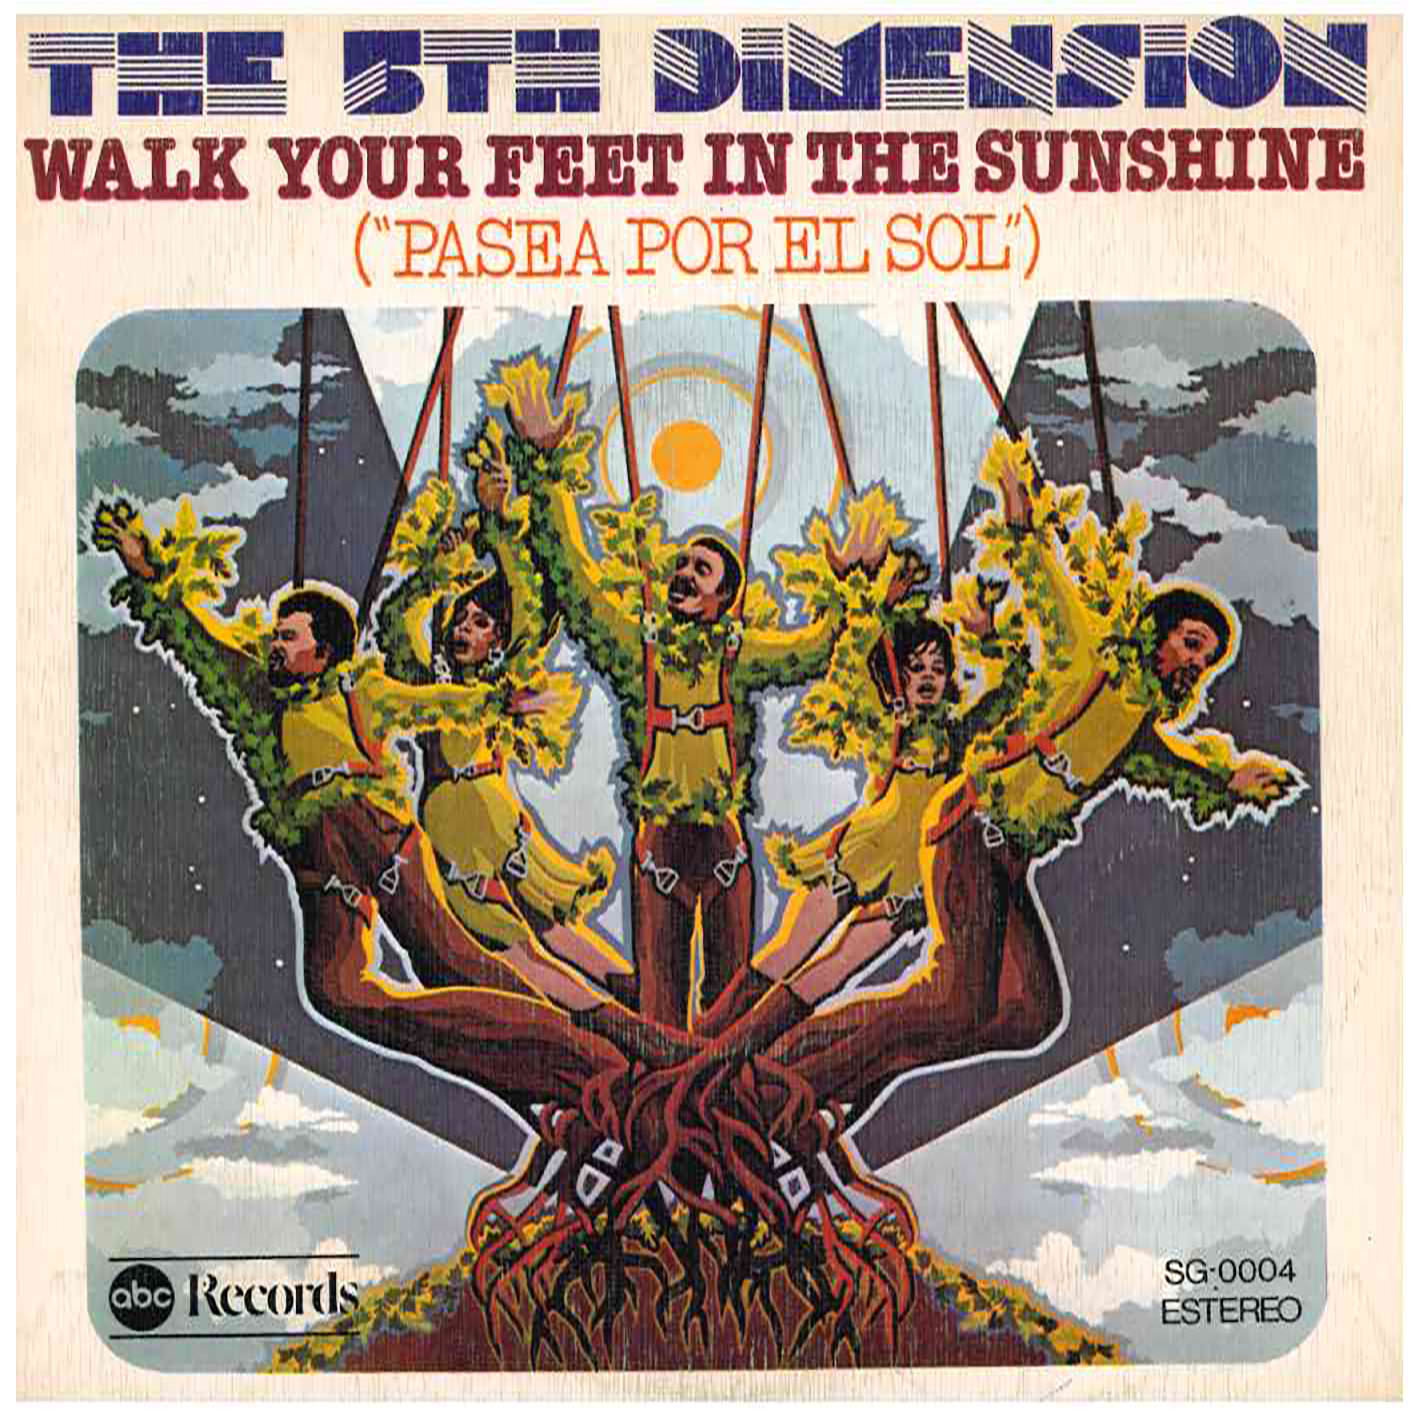 The 5th Dimension – Walk Your Feet In The Sunshine